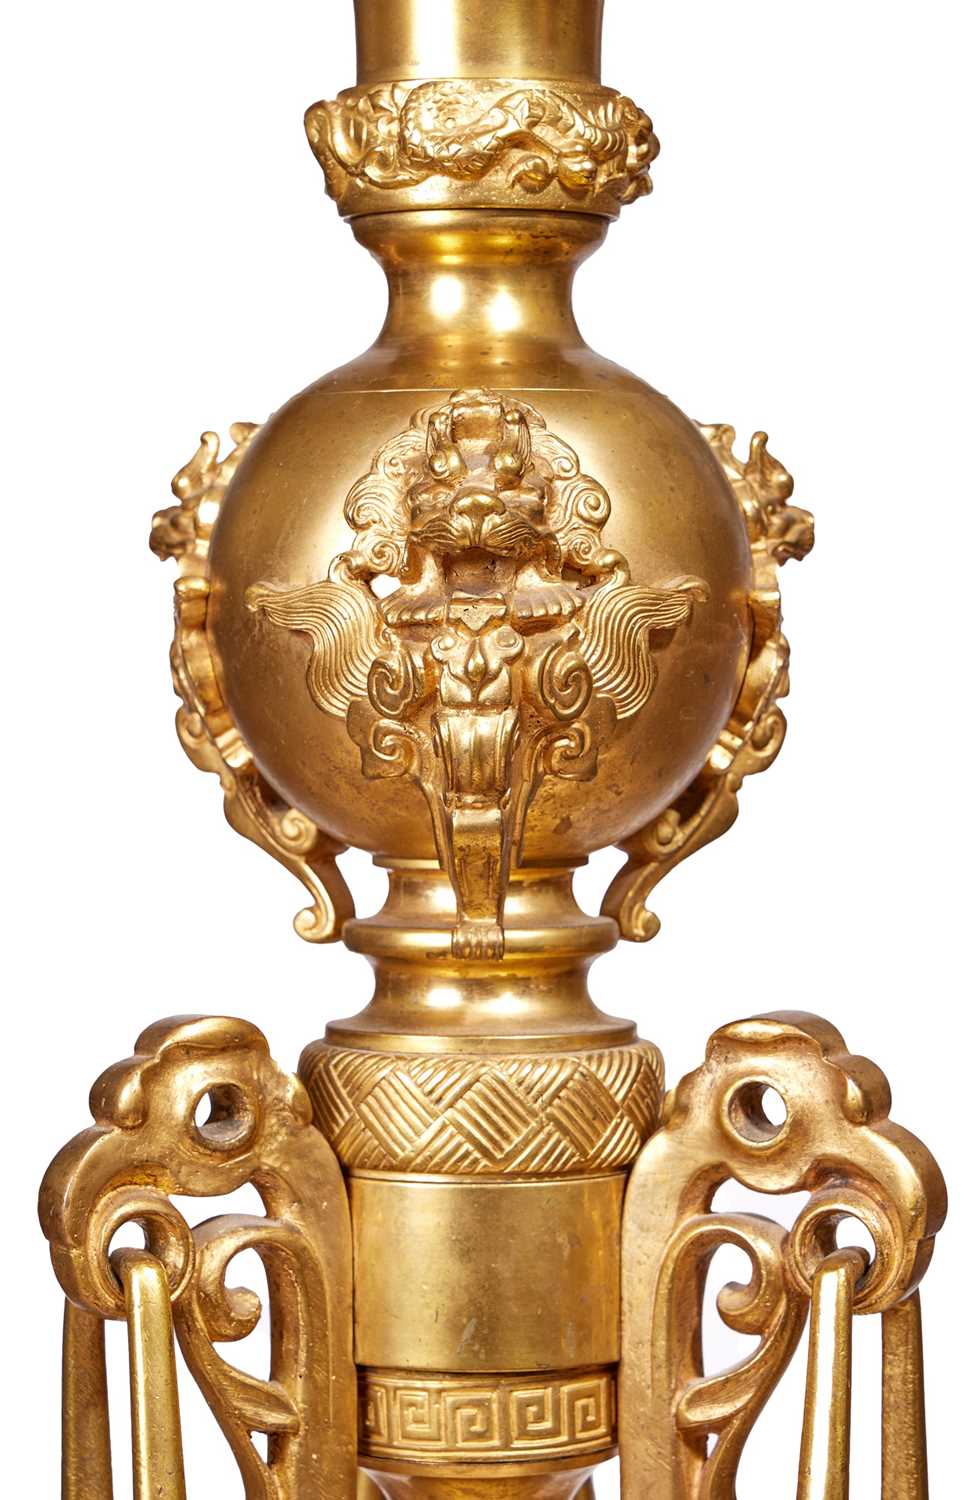 ATTRIBUTED TO EDOUARD LIEVRE: A FINE 19TH CENTURY GILT BRONZE FLOOR STANDING LAMP - Image 5 of 5